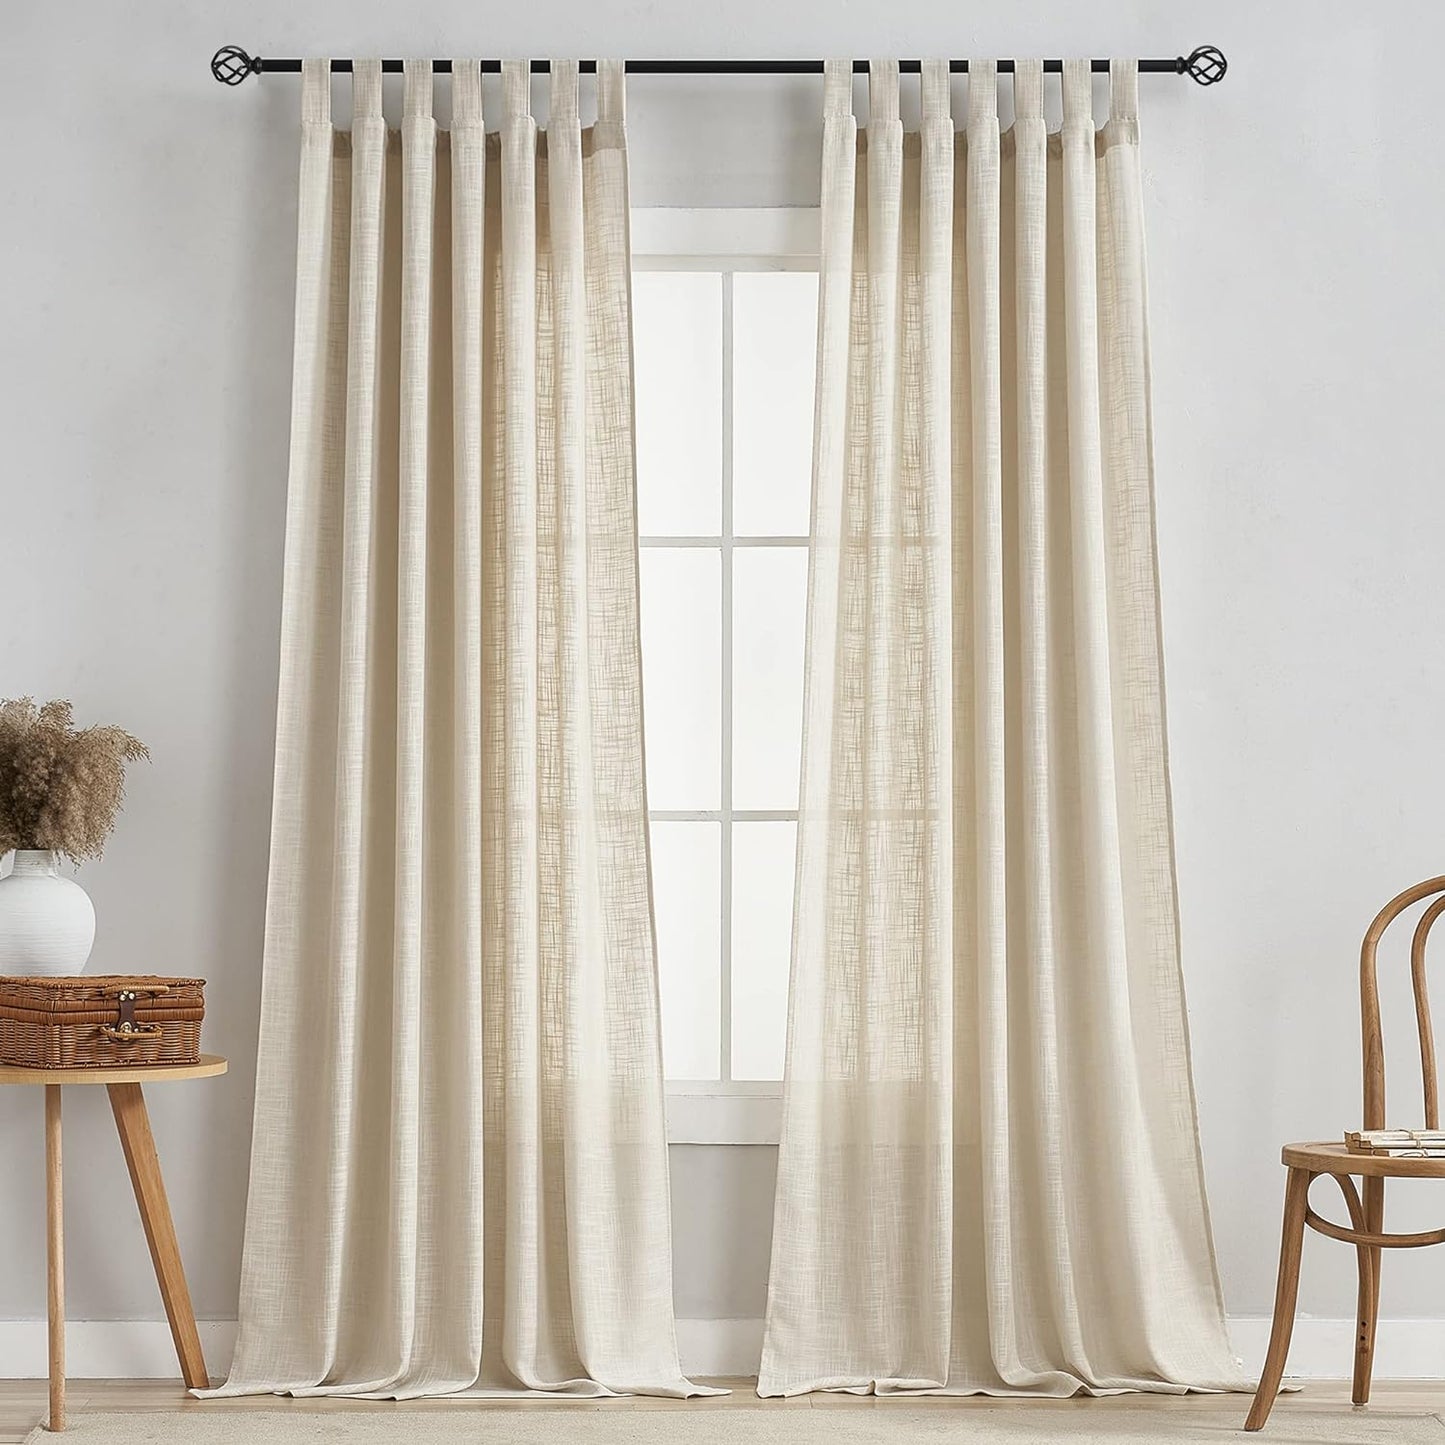 VOILYBIRD Natural Linen Semi Sheer Curtains Tab Top Light Filtering Elegant Curtains & Drapes for Living Room 52 X 84 Inch Length, Set of 2 Panels  VOILYBIRD Beige W52 X L84 